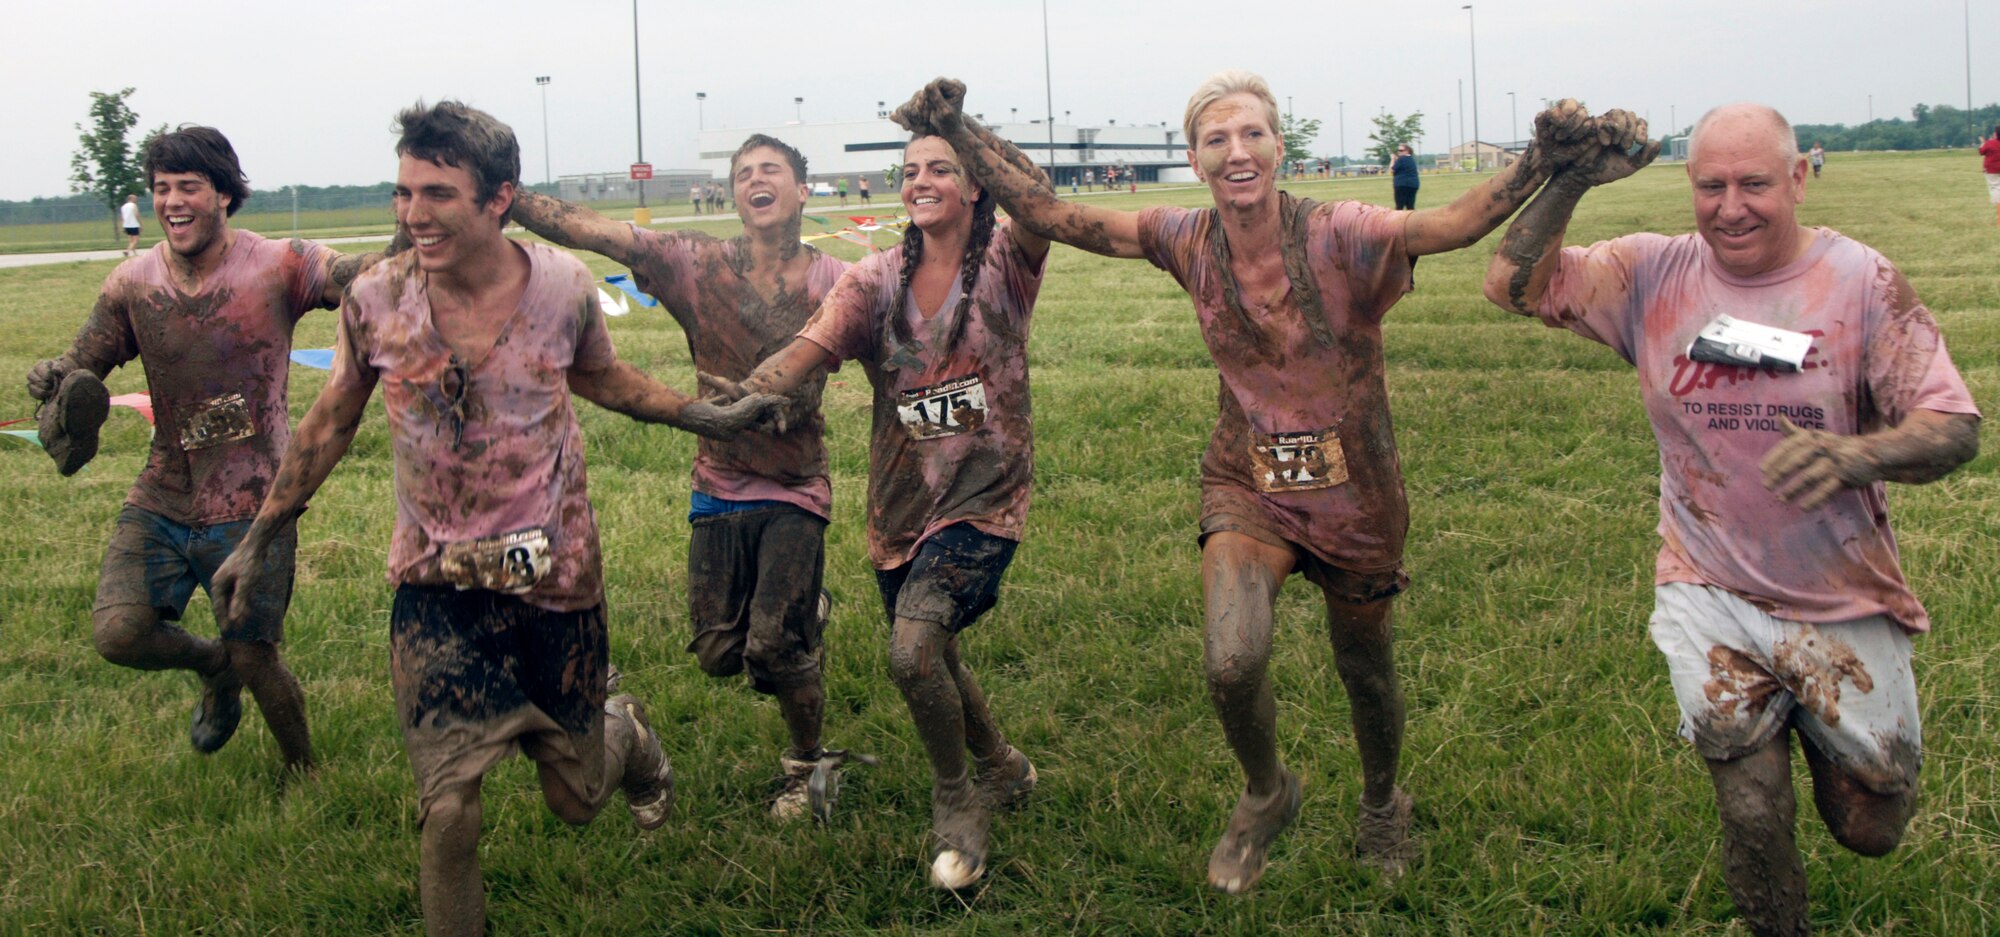 A co-ed team from St. Louis crosses the finish line after trasping through a 3.2 mile course of muck, mud and hay.  More than 1,000 runners competed in the second annual USO Mud Run at Mid-America Airport June 5, 2010. Members of Scott's 375th Civil Engineering Squadron helped construct the course and ensured its "mudworthiness" and numerous base volunteers assisted with the event. (Photo by Karen Petitt/375th AMW/PA)